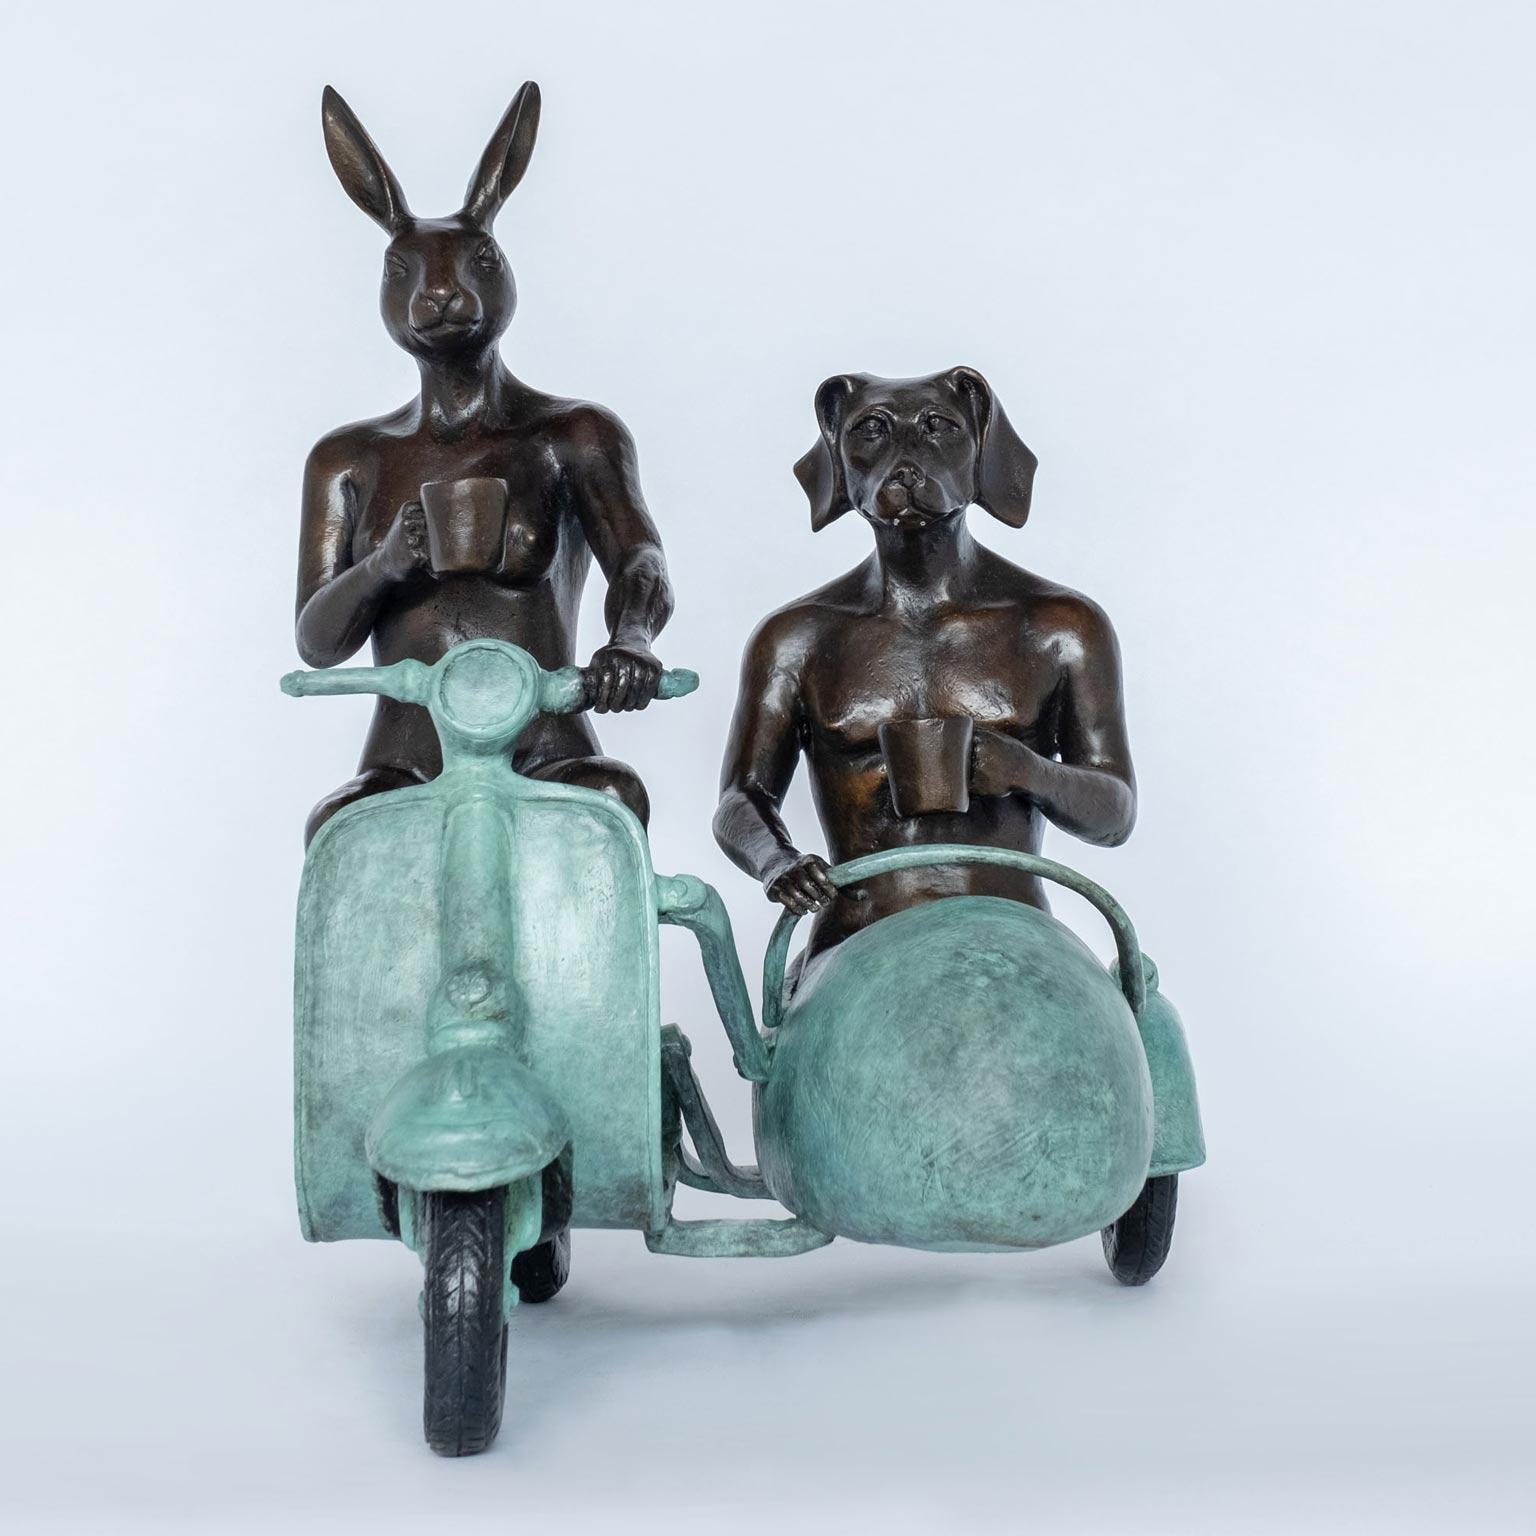 Title: They were always side by side
Authentic bronze sculpture
Limited Edition

World Famous Contemporary Artists: Husband and wife team, Gillie and Marc, are New York and Sydney-based contemporary artists who collaborate to create artworks as one.